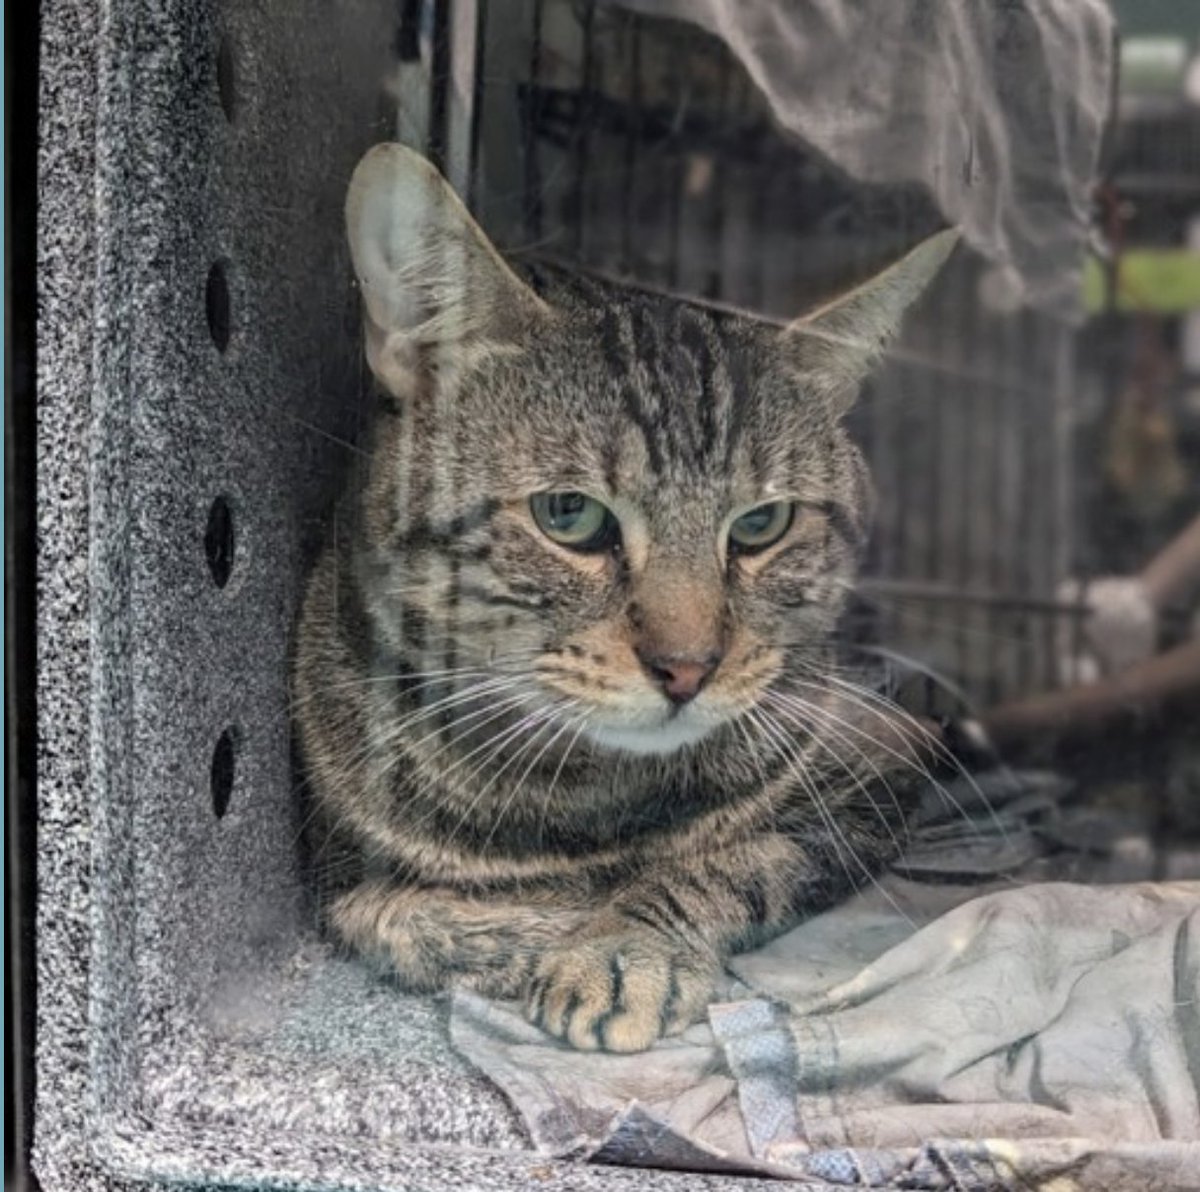 🆘🆘 For Tiger 3 yo in Brooklyn ACC 🆘🆘 First time on Emergency Placement List 🔥 Since 42 days in shelter 💔😿 TIGER NEEDS AN EXPERIENCED ADOPTER or FOSTER - 'Owner surrender on 4/17, on a DOH hold due to previous bite. His owner stated that he attacked her for unknown